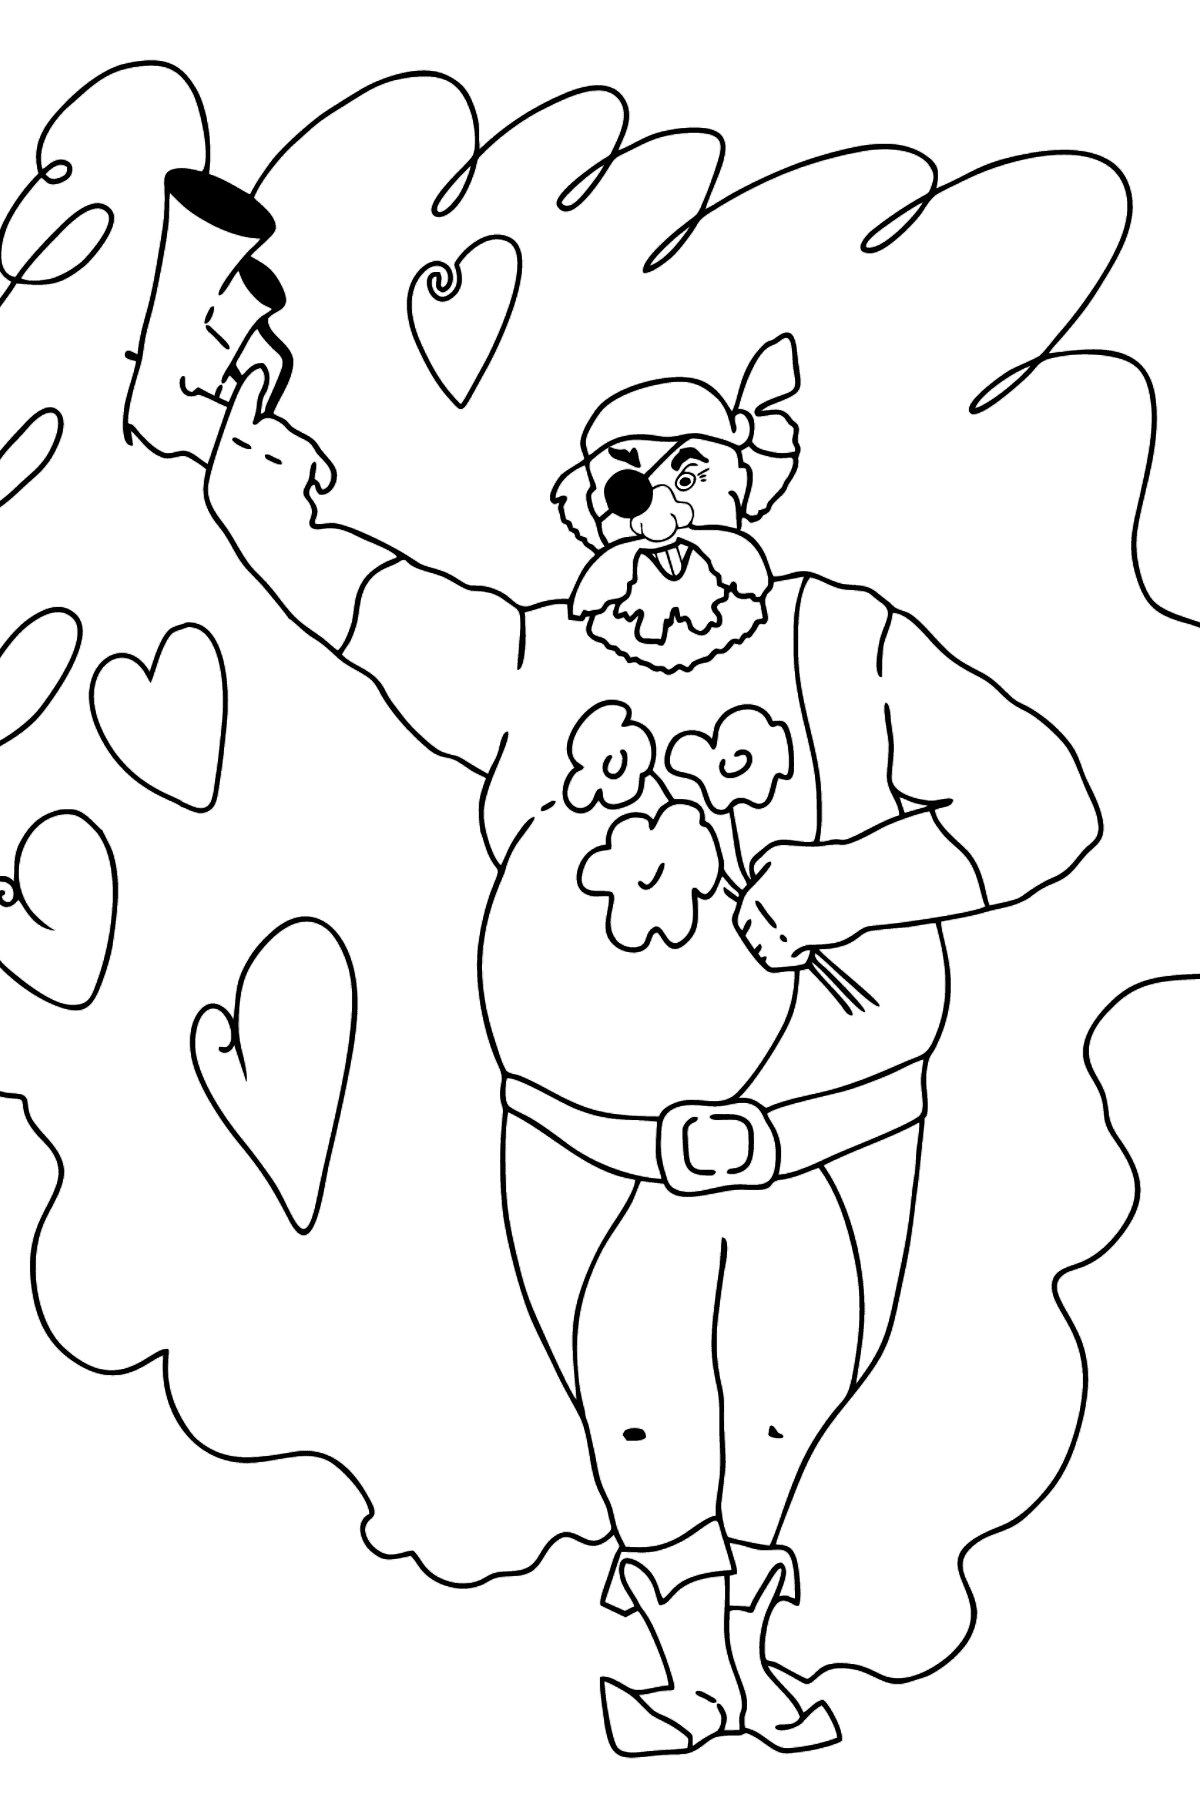 Coloring Page - A Pirate is in Love - Coloring Pages for Kids